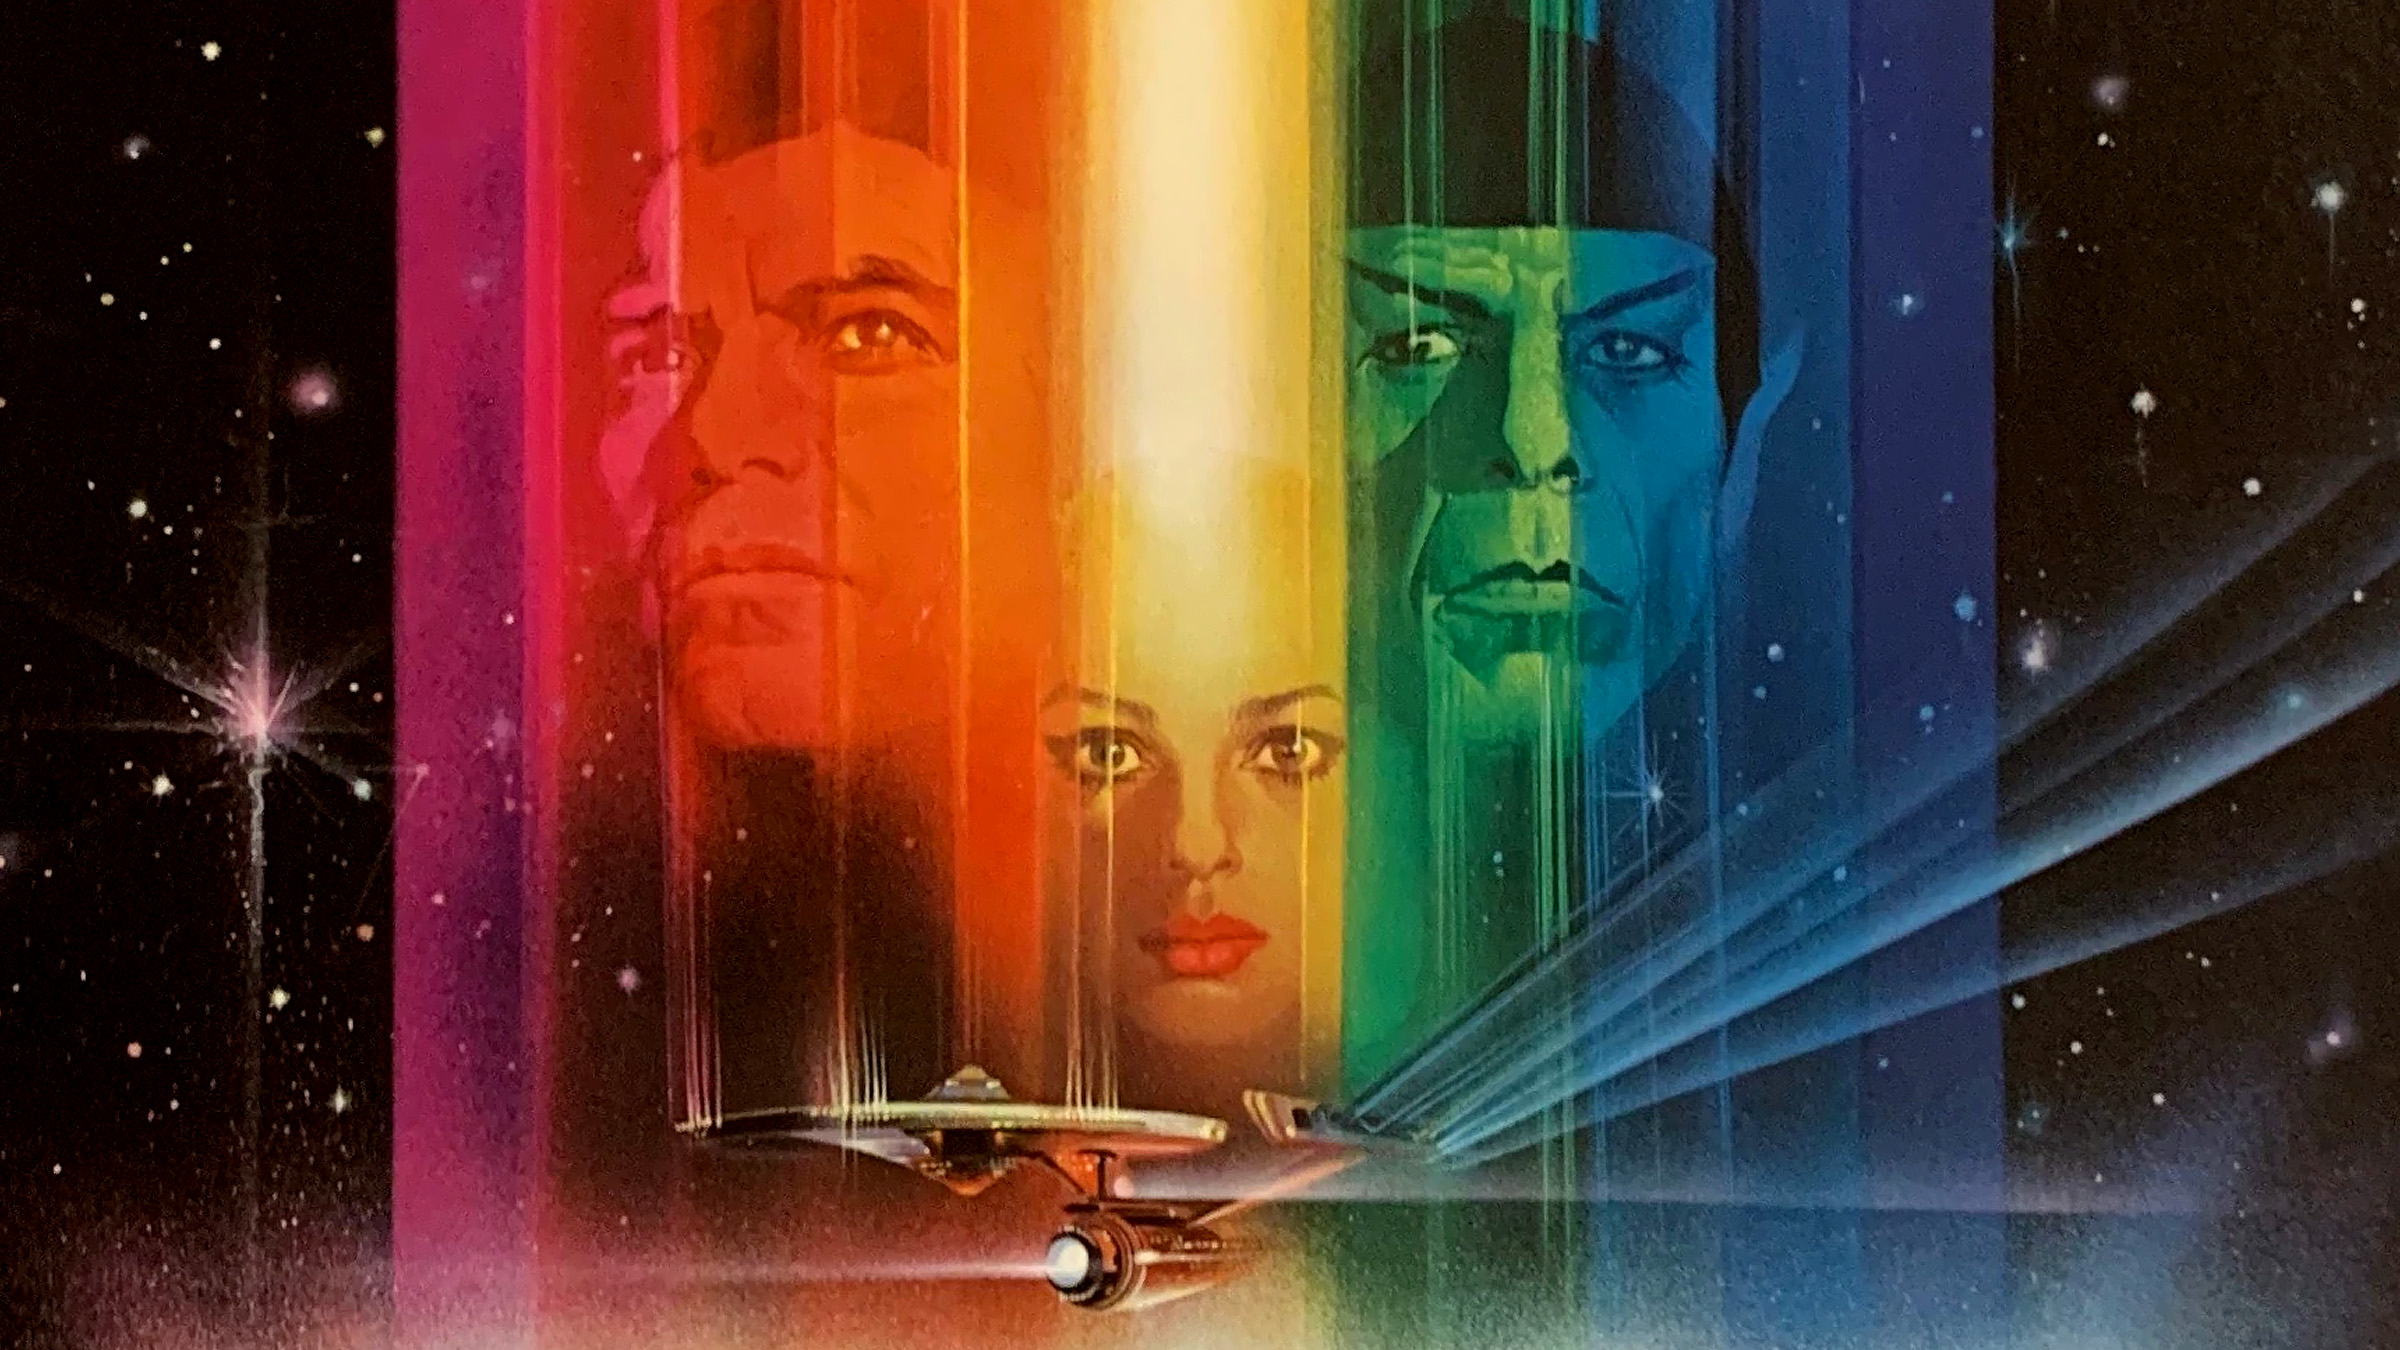 Made in Frame: The 4K Remastering of “Star Trek: The Motion Picture”